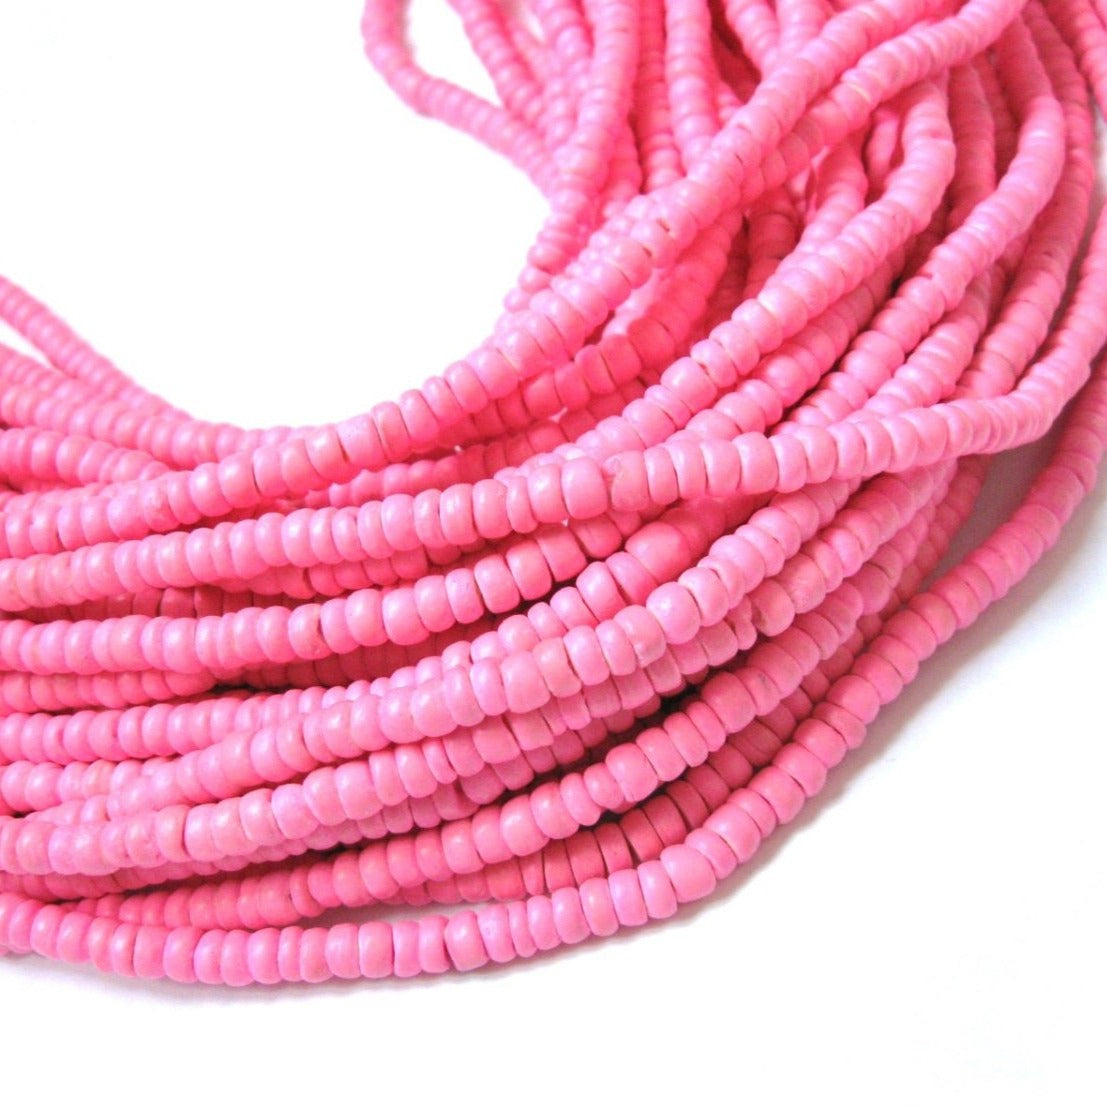 Coconut bead 150 soft pink wood Beads - Coconut Rondelle Disk Beads 4-5mm